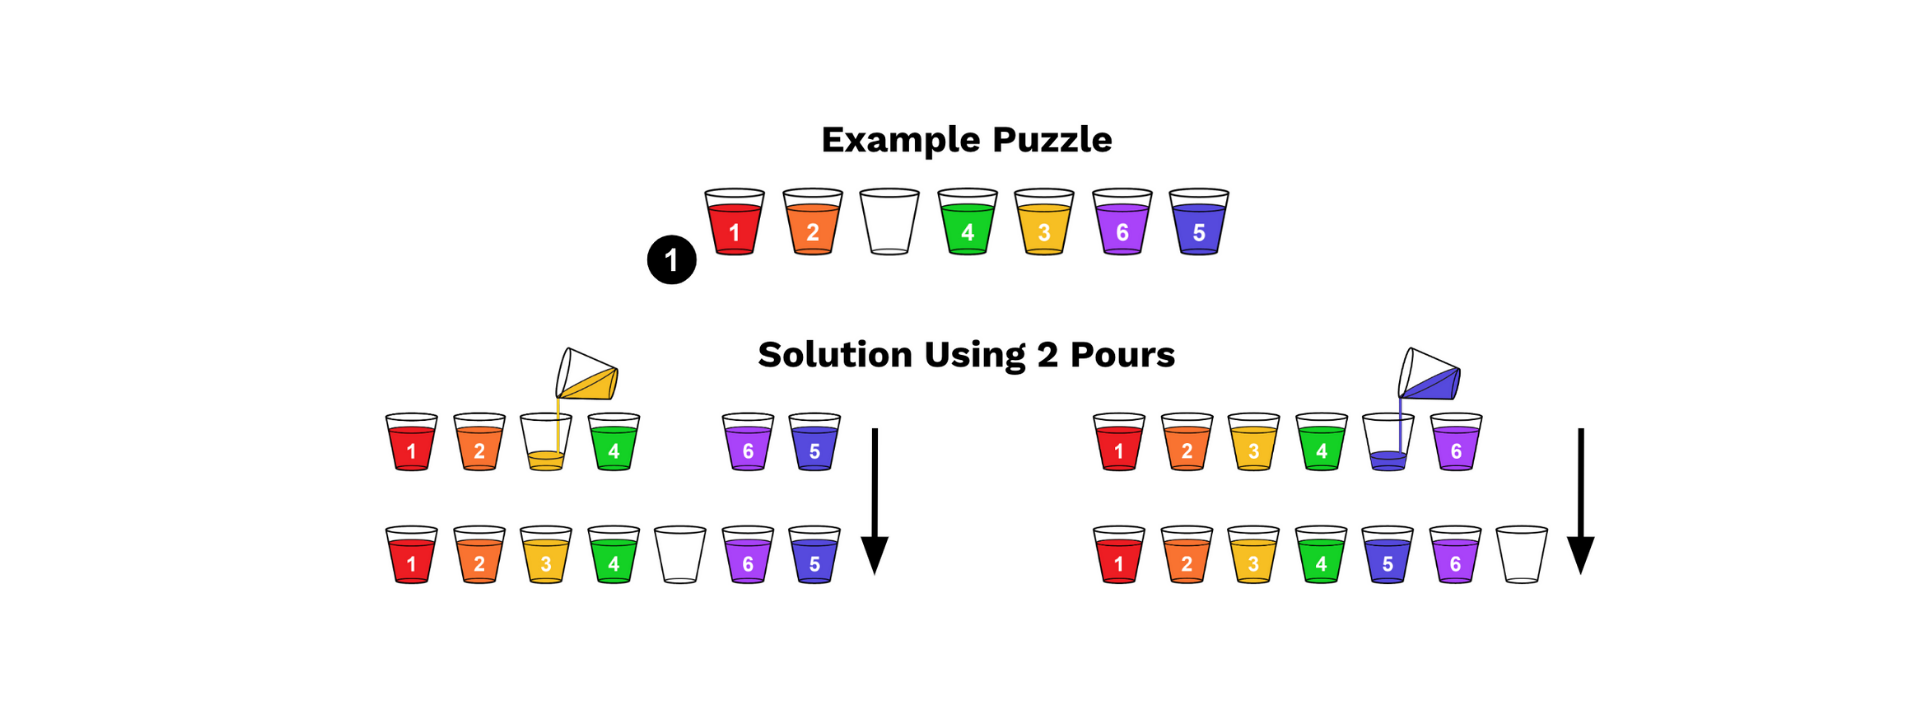 Example puzzles